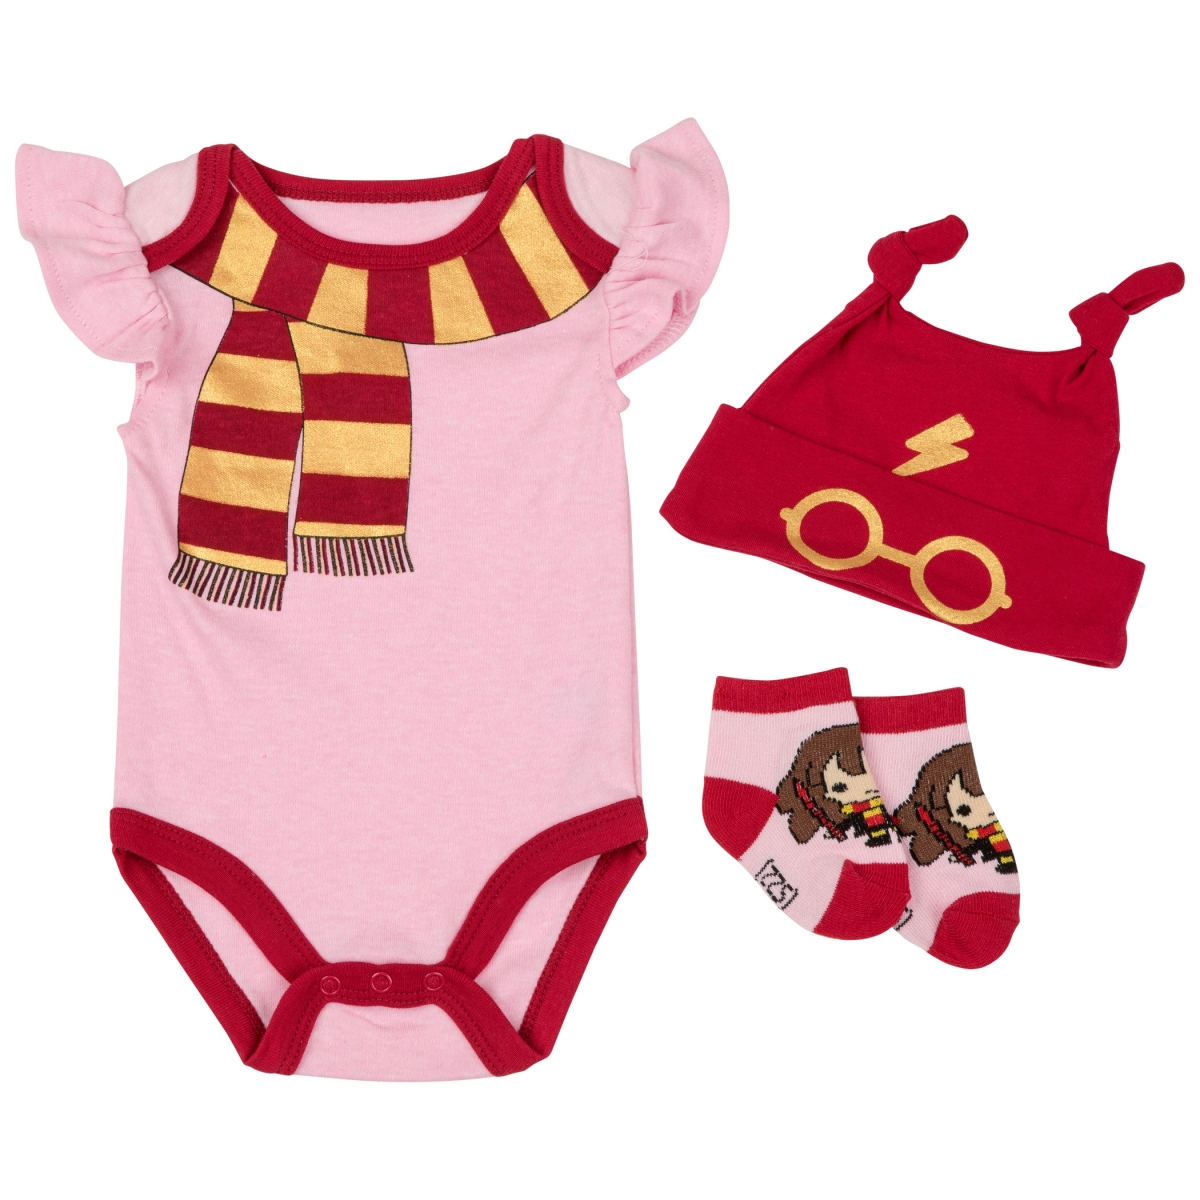 Picture of Harry Potter 866288-0-3months School Uniform Infant Bodysuit Set with Cap&#44; Red&#44; Pink & Yellow - 0-3 Months - 3 Piece